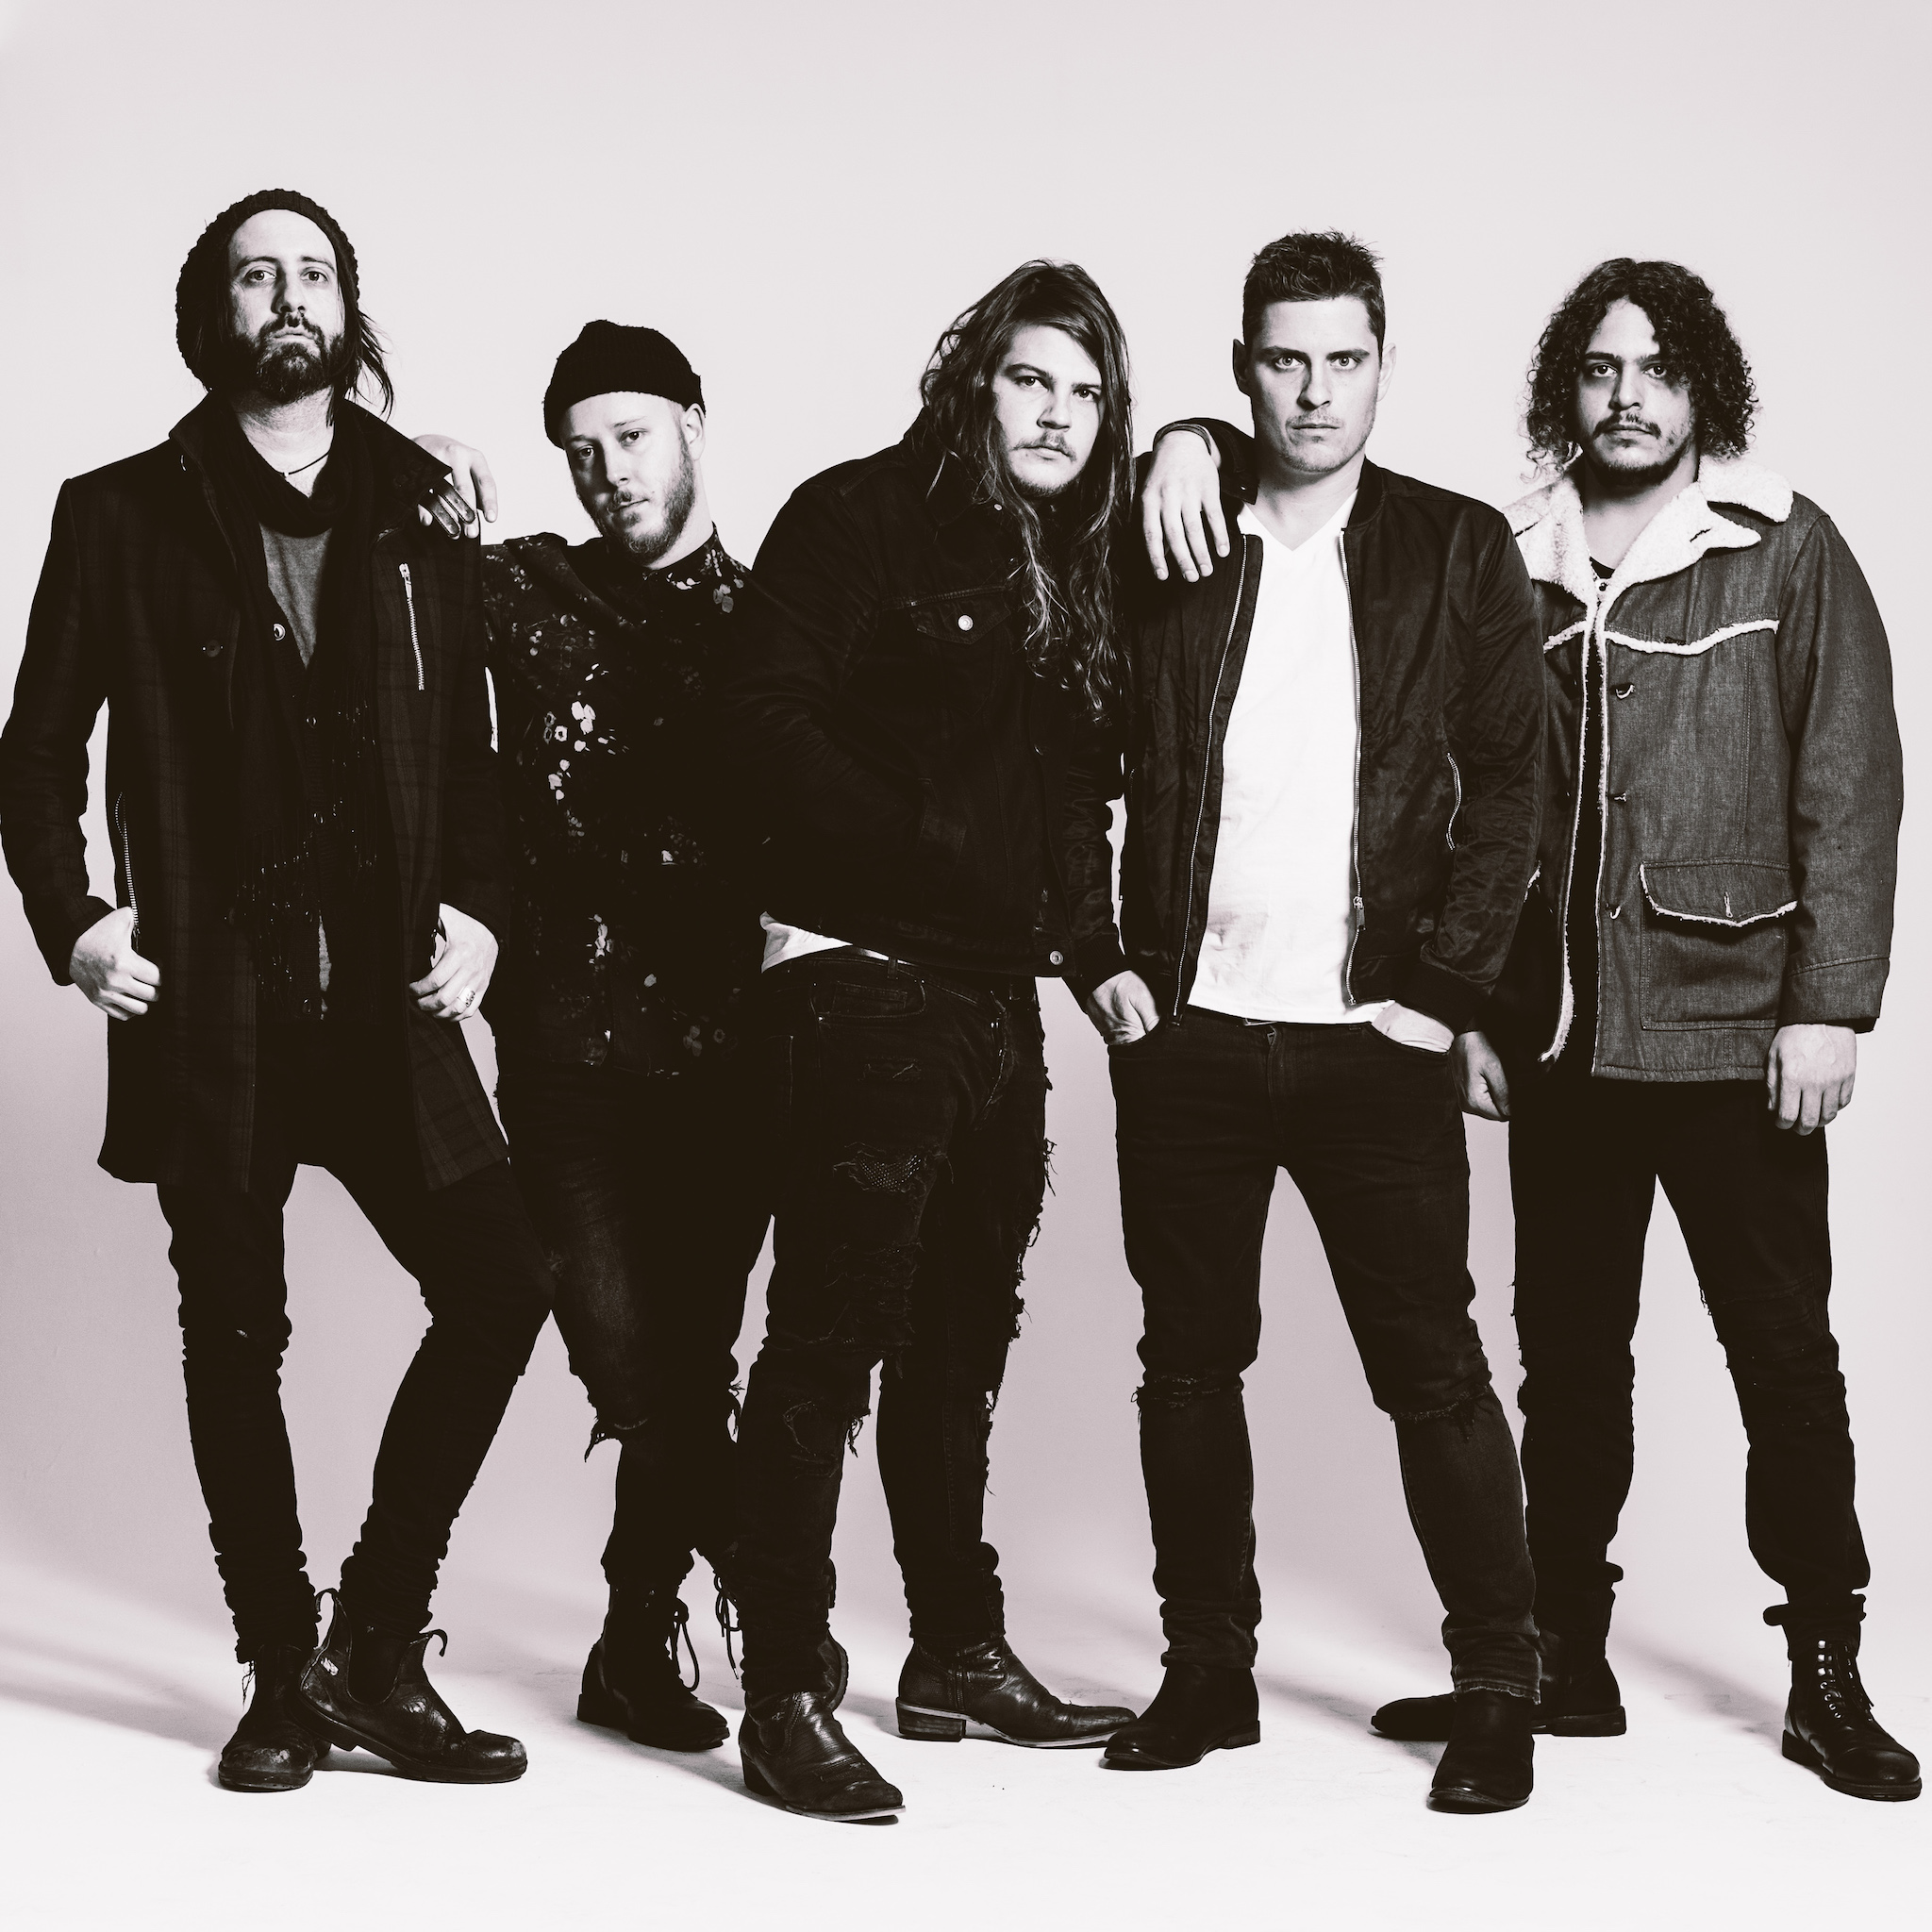 THE GLORIOUS SONS DEBUT COVER OF KANYE WEST’S "RUNAWAY"